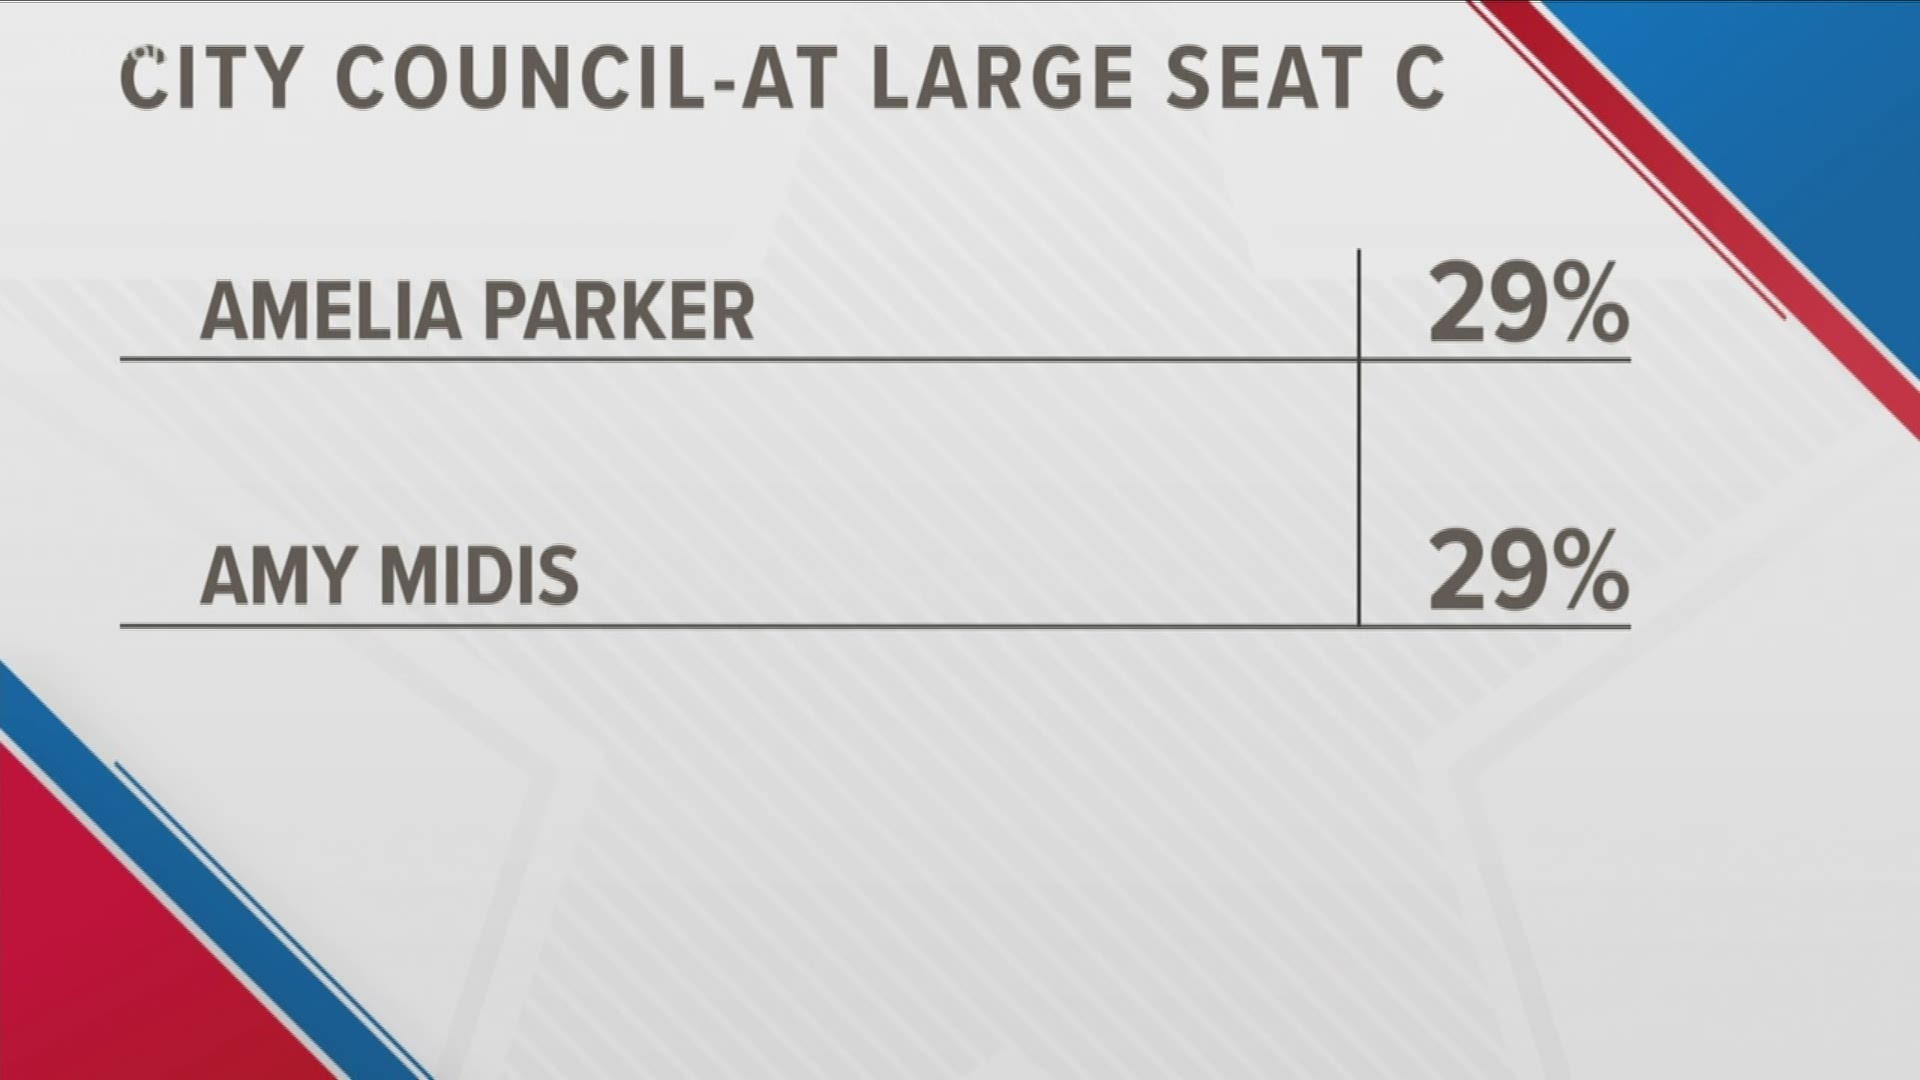 Five candidates vied for the City Council Seat C in the primaries, and only two advanced. Amelia Parker and Amy Midis will move onto the November election.